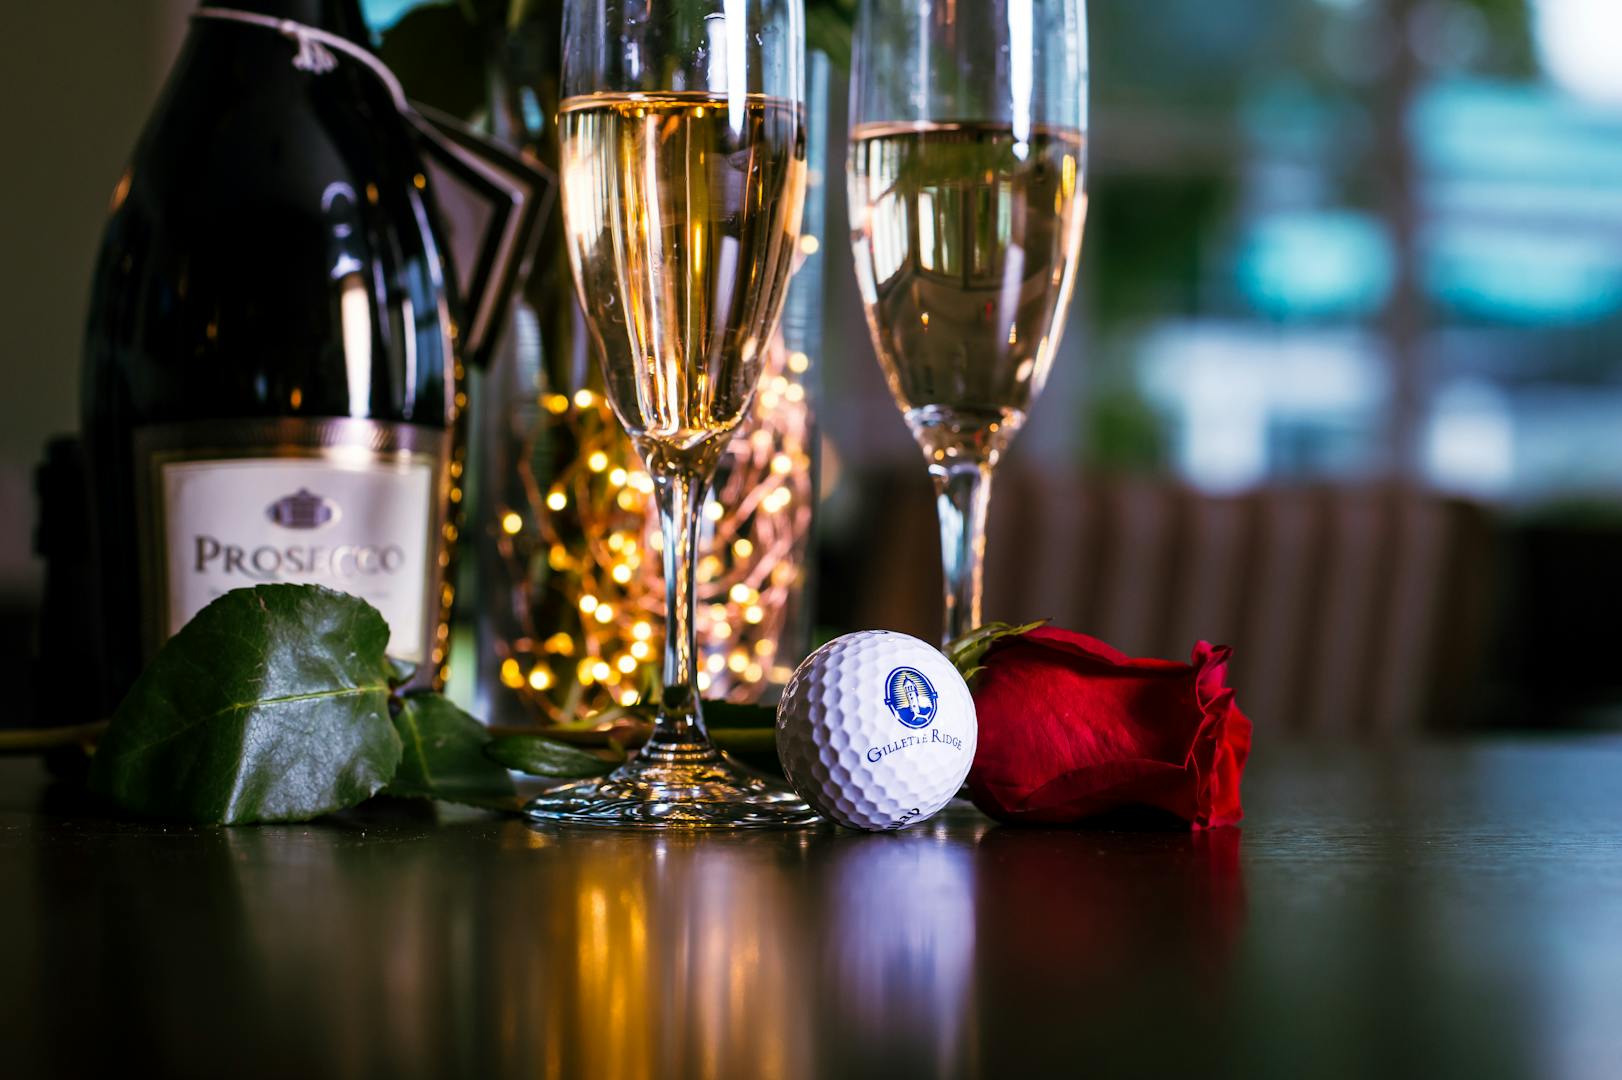 Gillette Ridge logo golf ball, a rose, two flutes of prosecco and a bottle of prosecco arranged on a table.